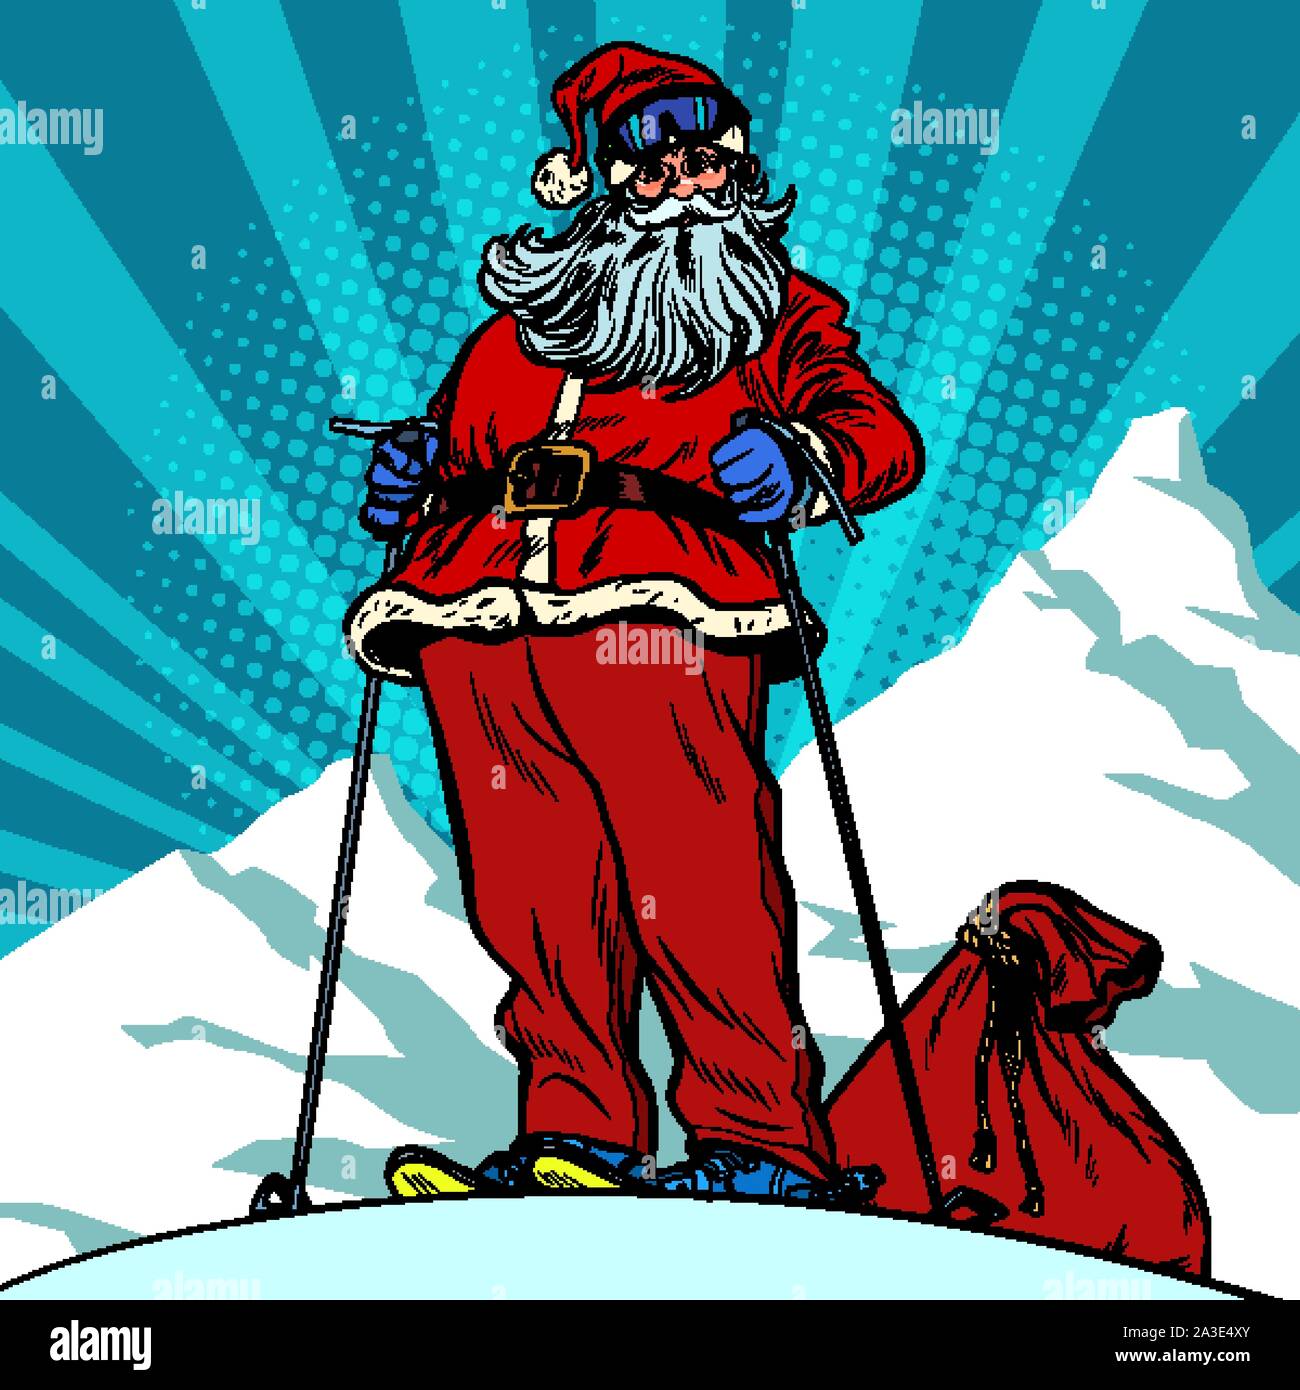 Skier in the mountains Santa Claus character merry Christmas and happy new year. Pop art retro vector illustration vintage kitsch drawing 50s 60s Stock Vector